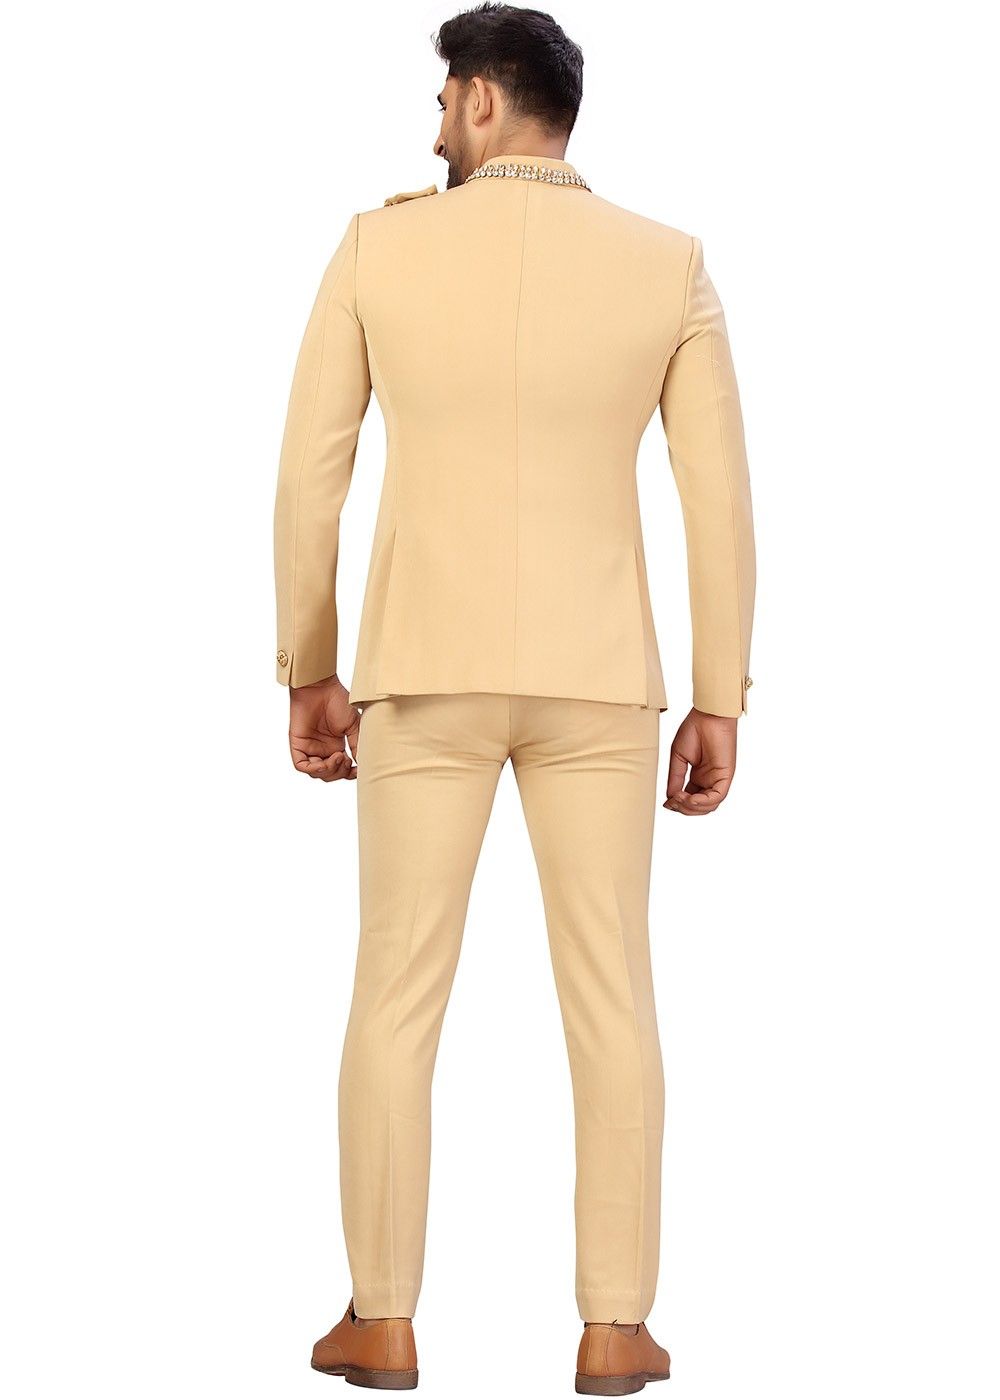 506205: Beige and Brown color family stitched Jodhpuri Suit .